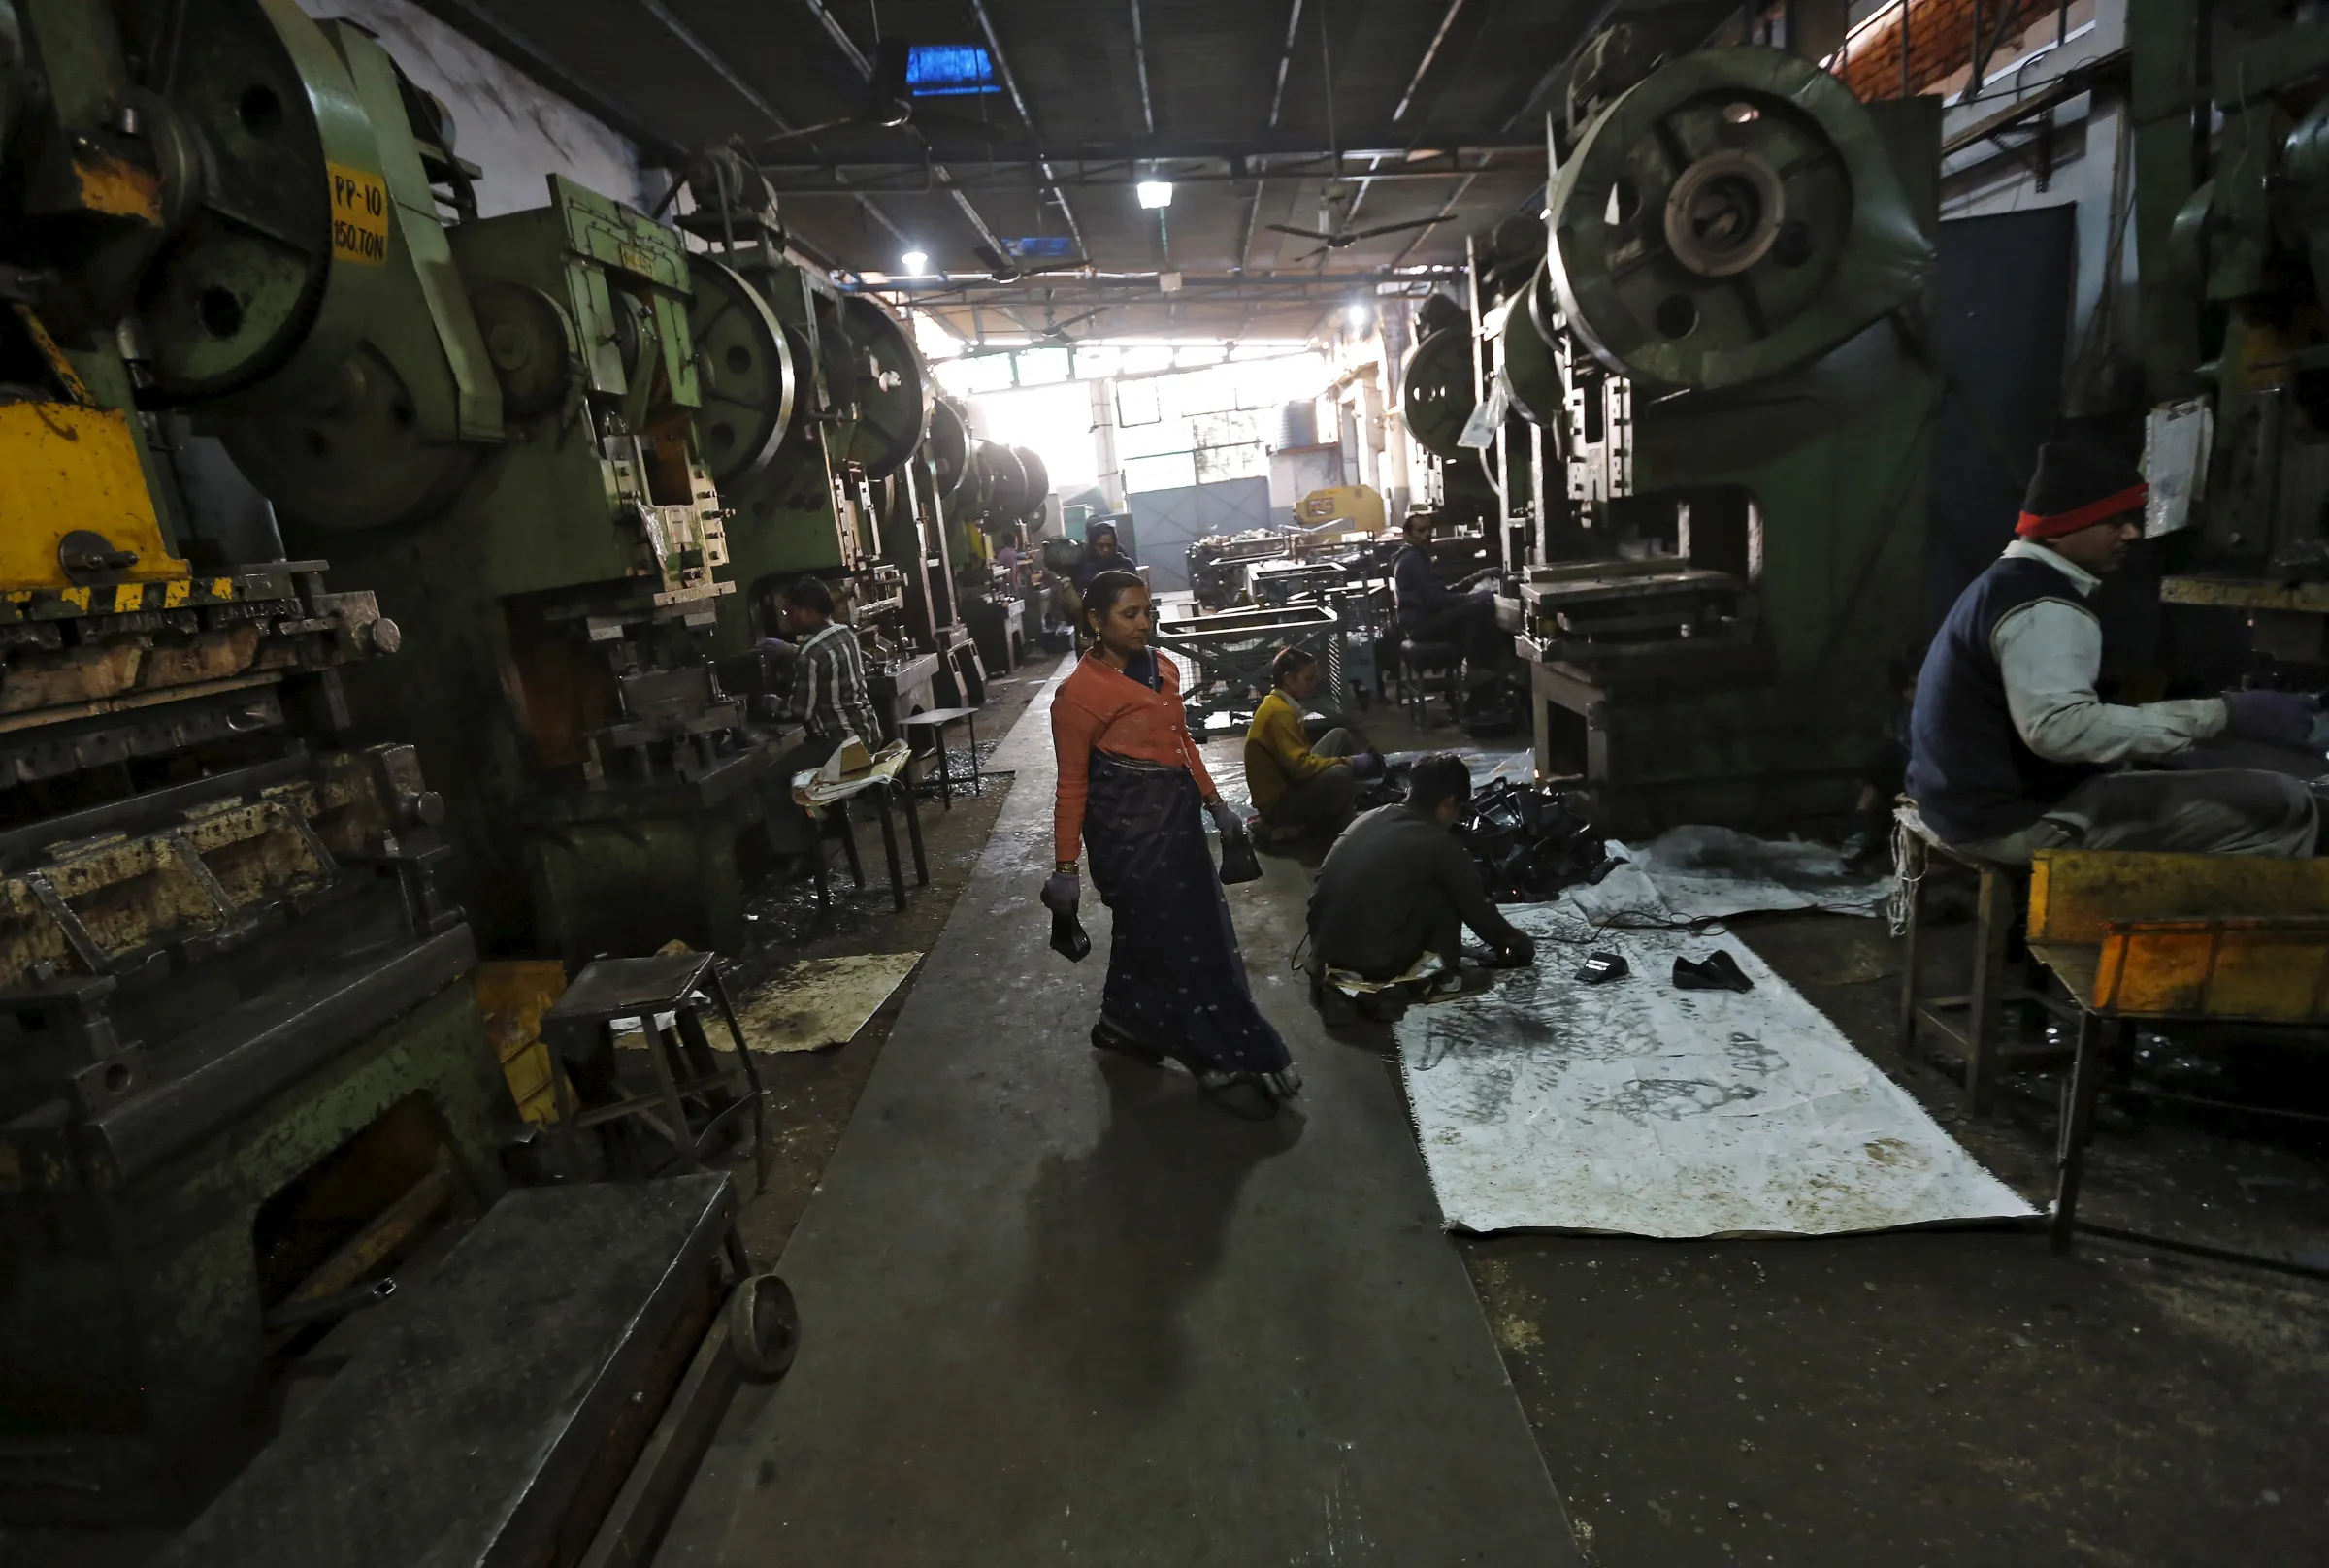 Workers make auto parts on machines inside a manufacturing unit in Faridabad, India, December 24, 2015. REUTERS/Adnan Abidi